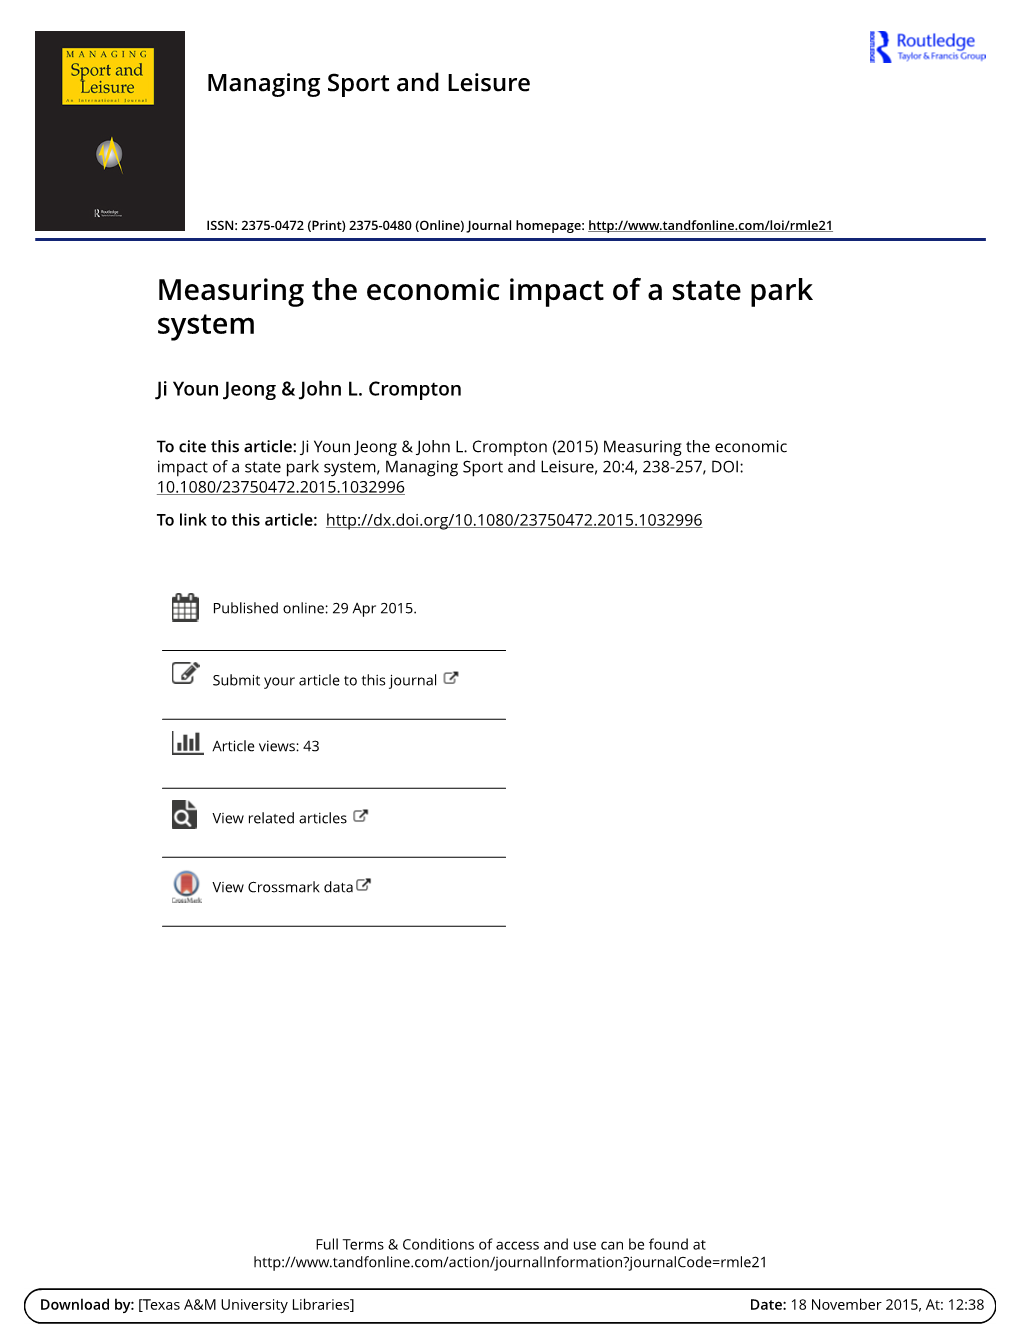 Measuring the Economic Impact of a State Park System